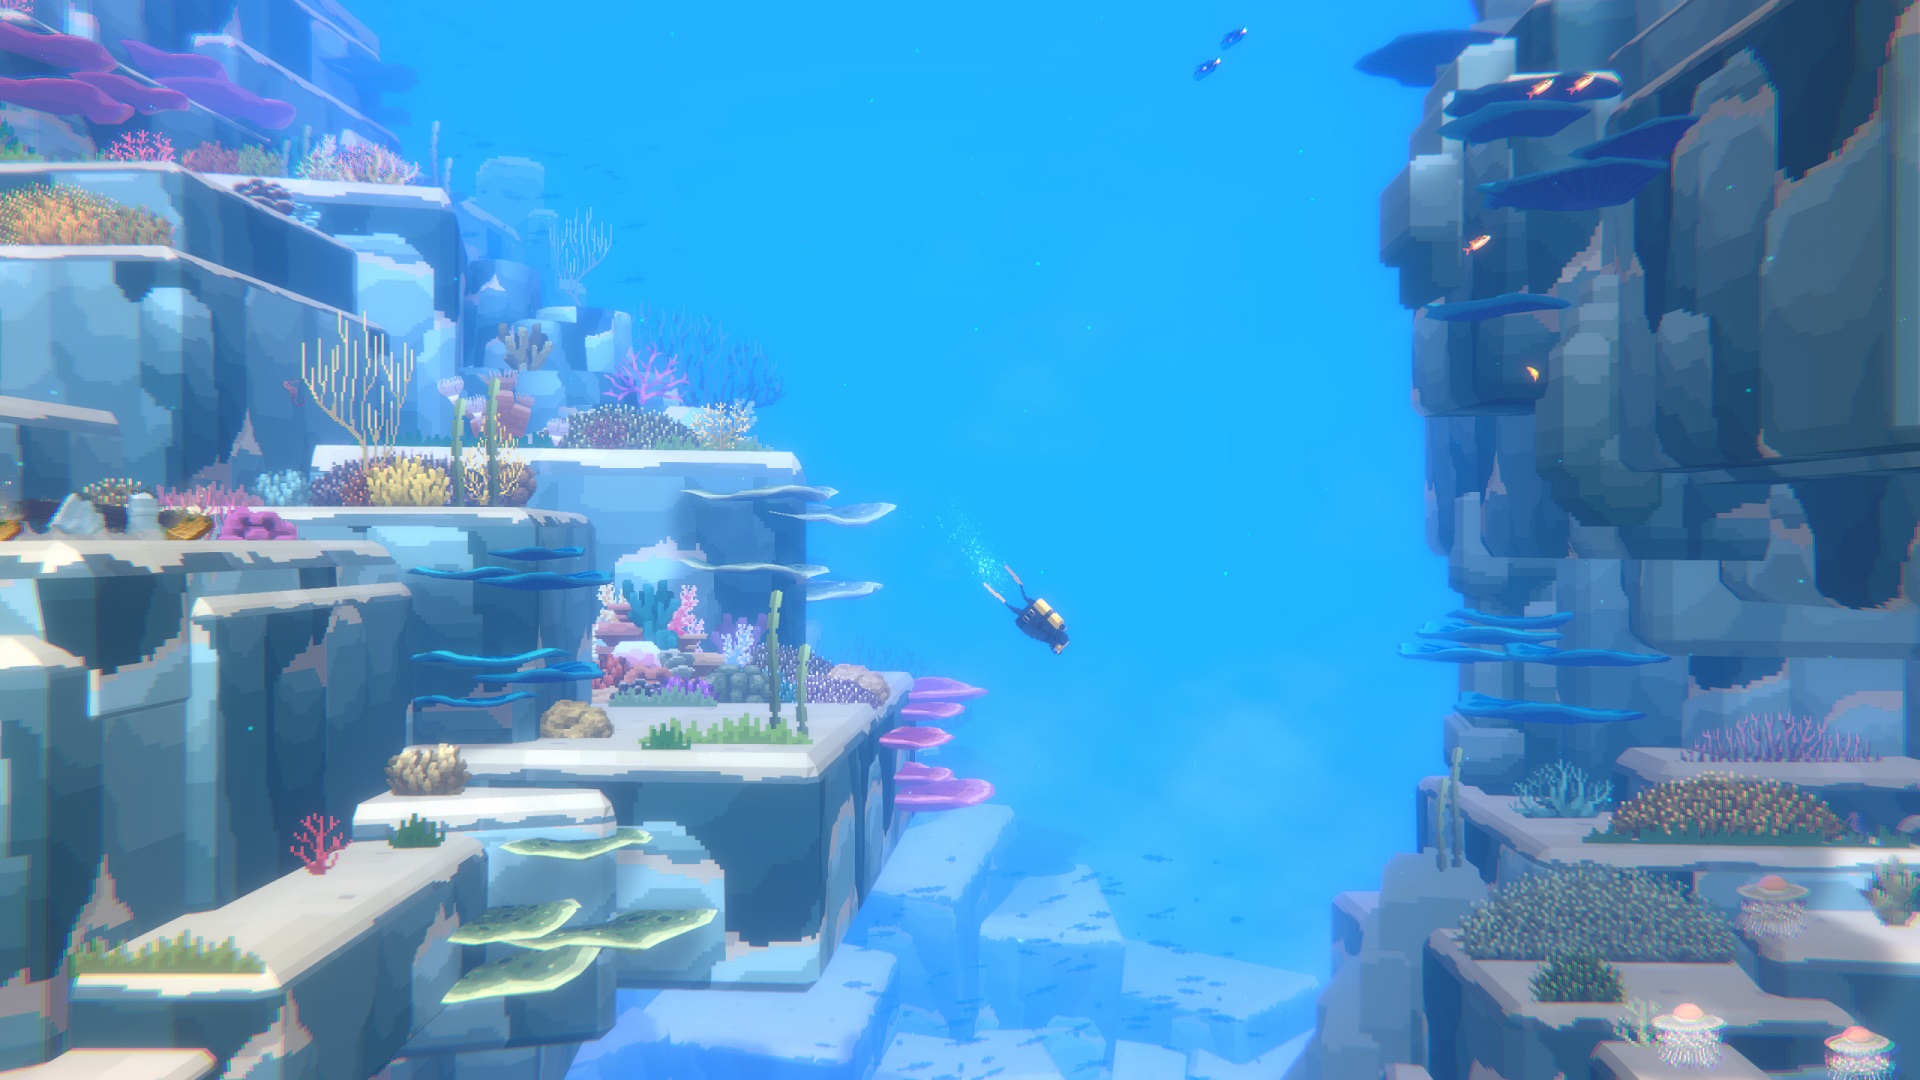 Review: DAVE THE DIVER